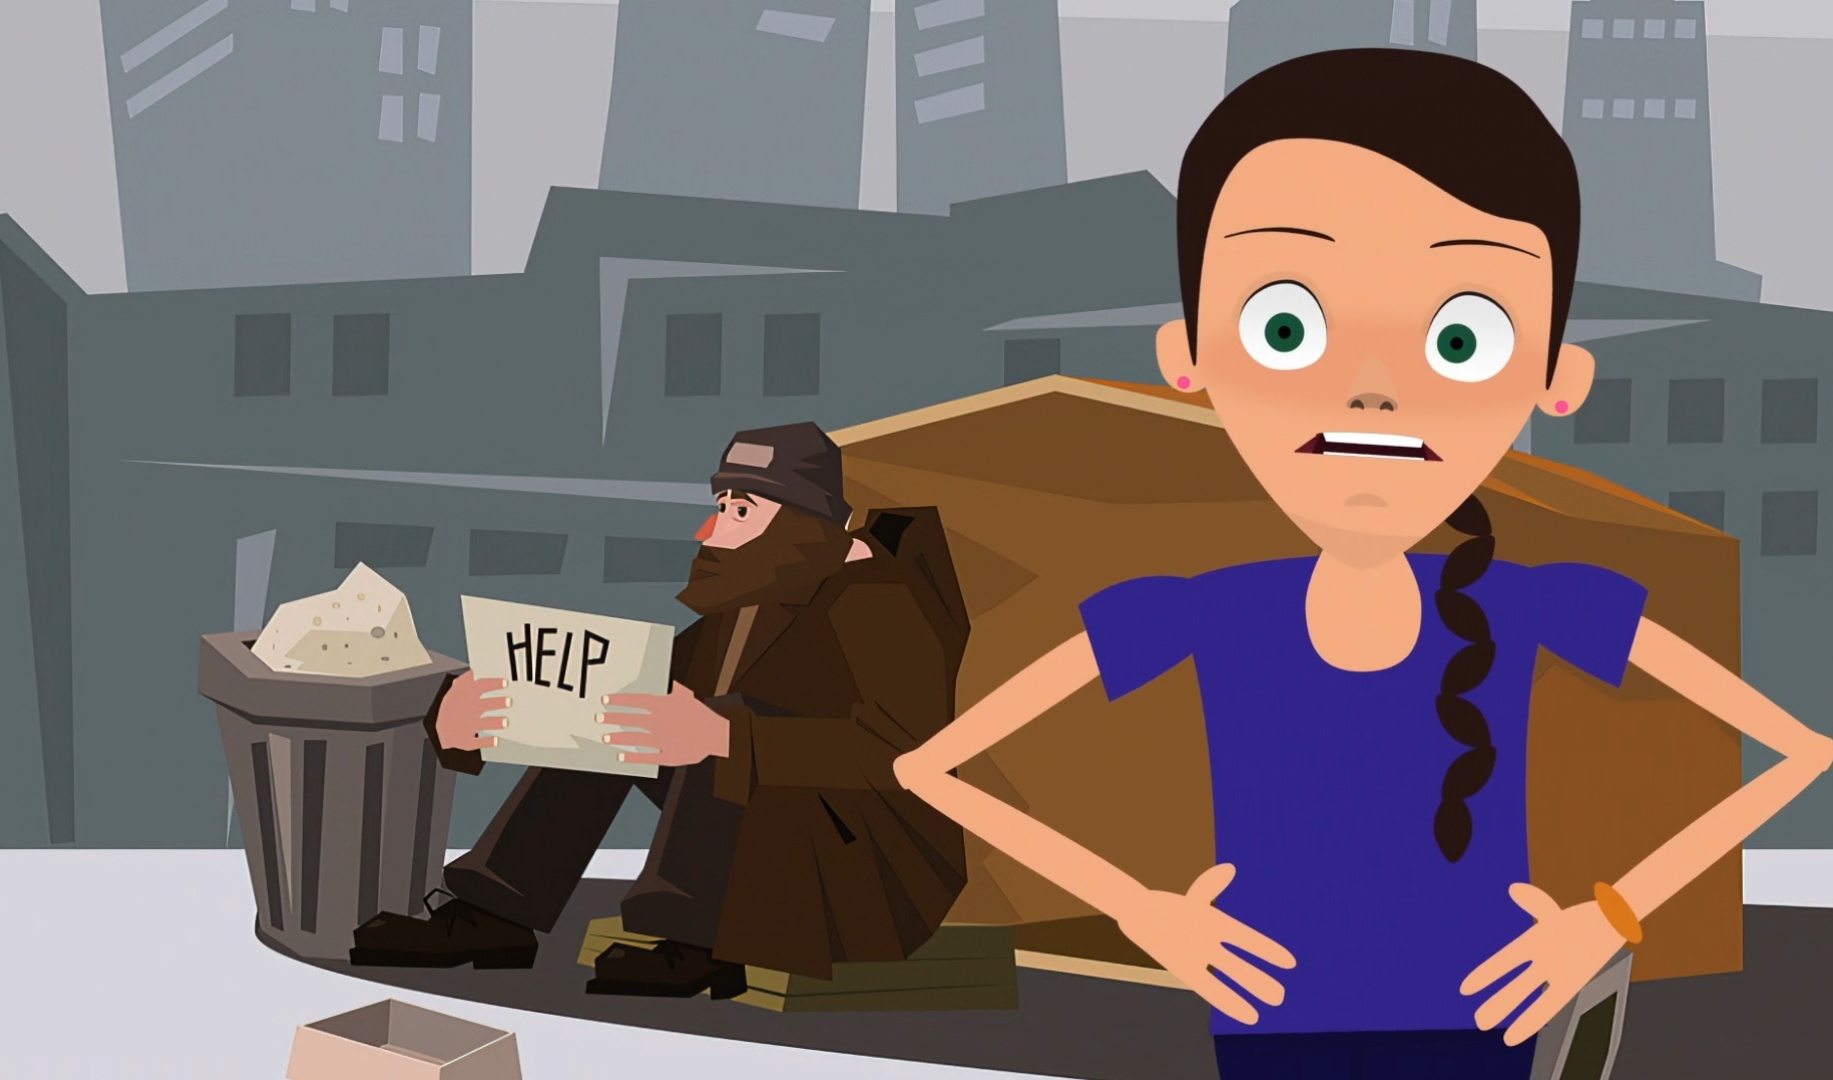 New animated video focuses on young homeless people